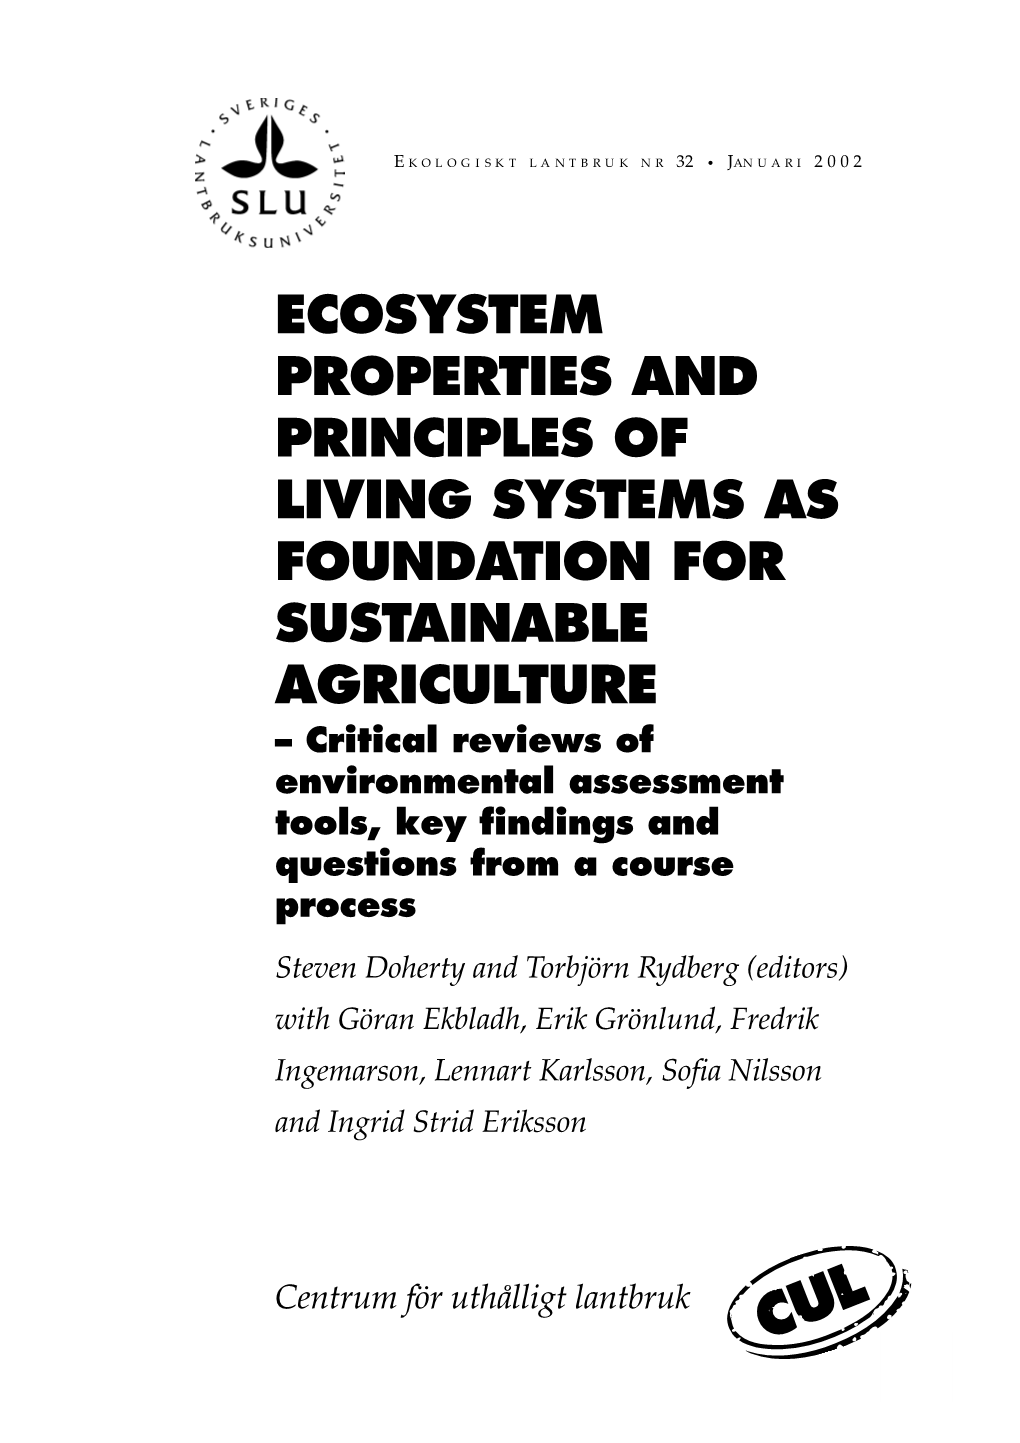 Ecosystem Properties and Principles of Living